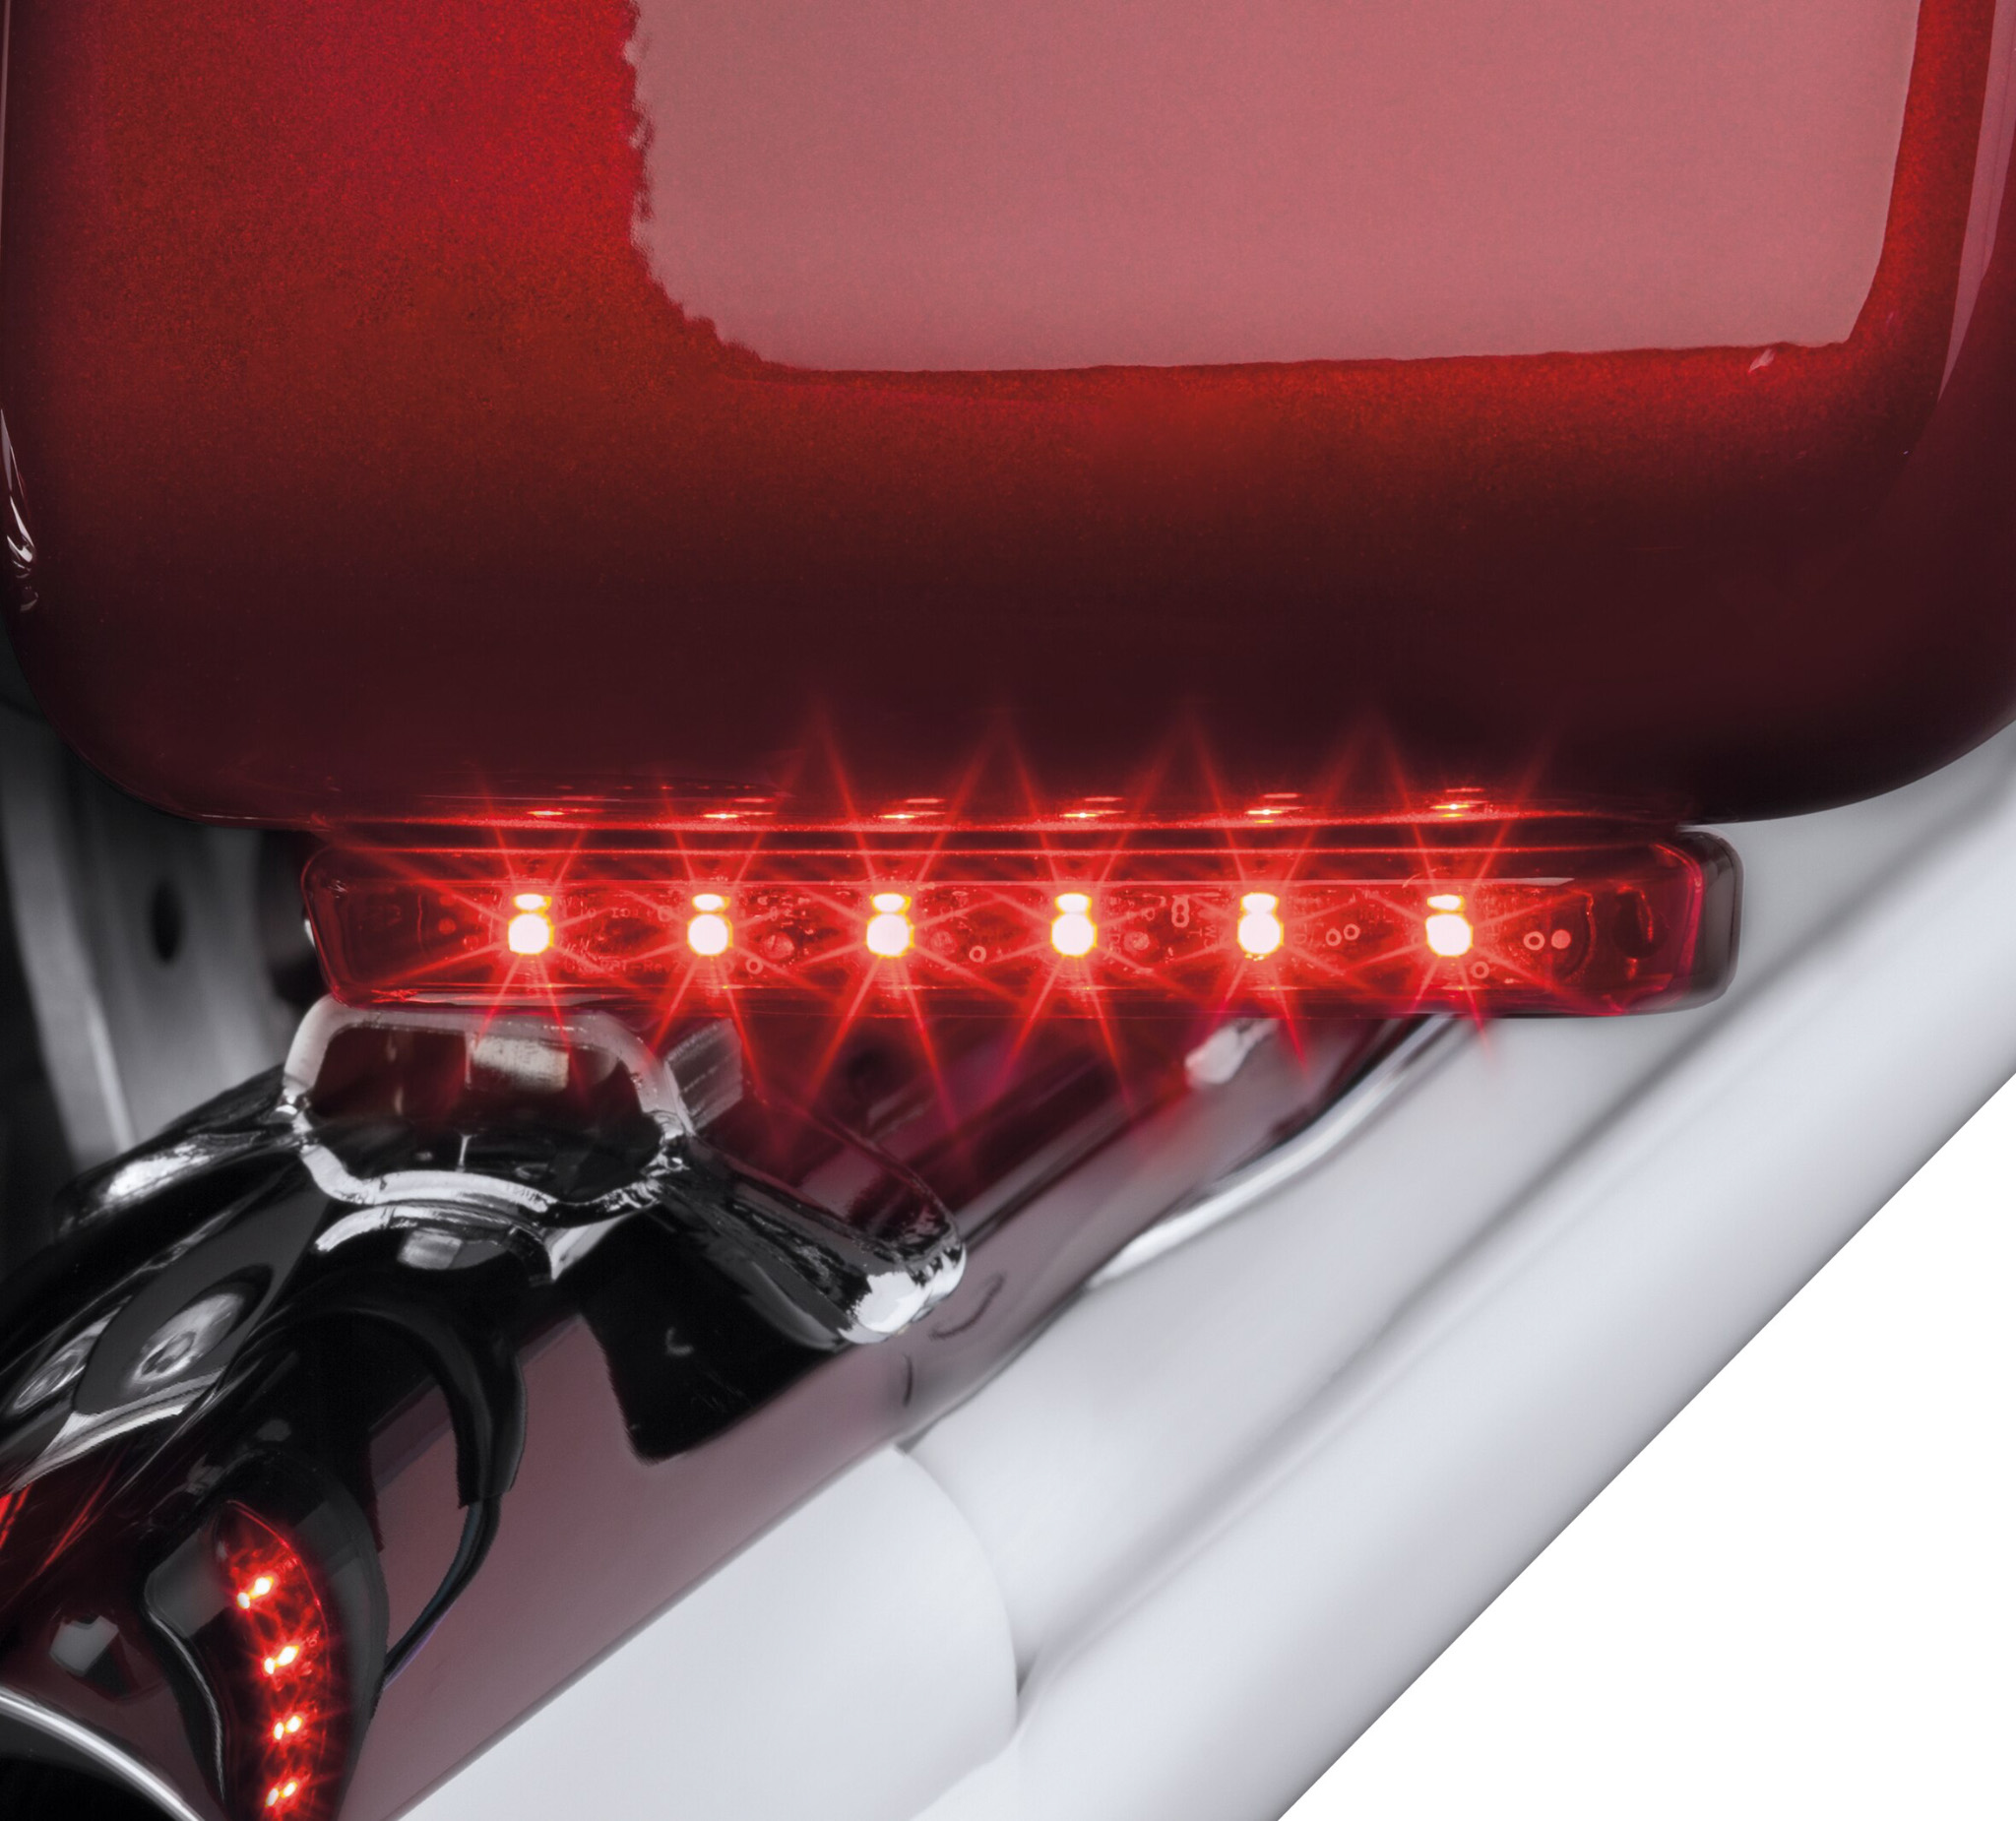 Electra Glo Stealth Auxiliary LED Run/Brake/Turn Lamp - Red Lens 